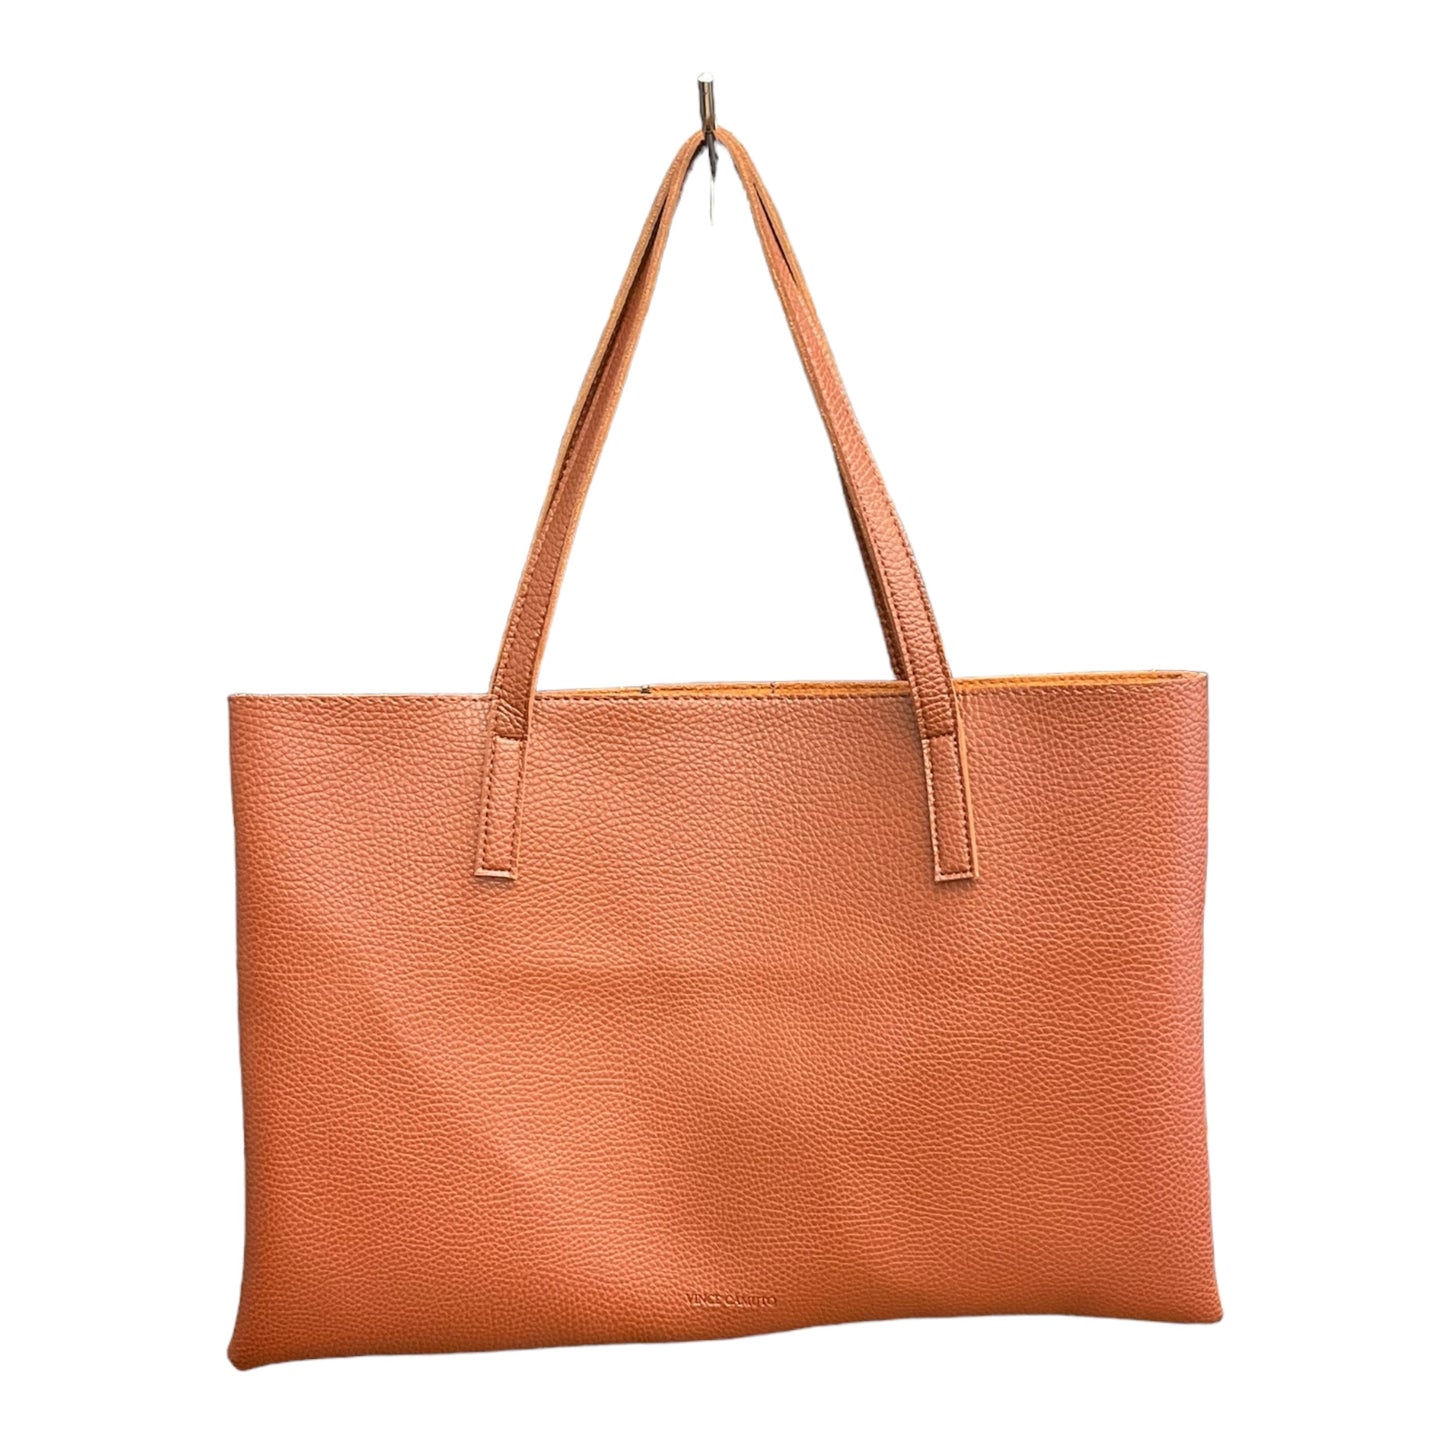 Tote Leather By Vince Camuto  Size: Medium